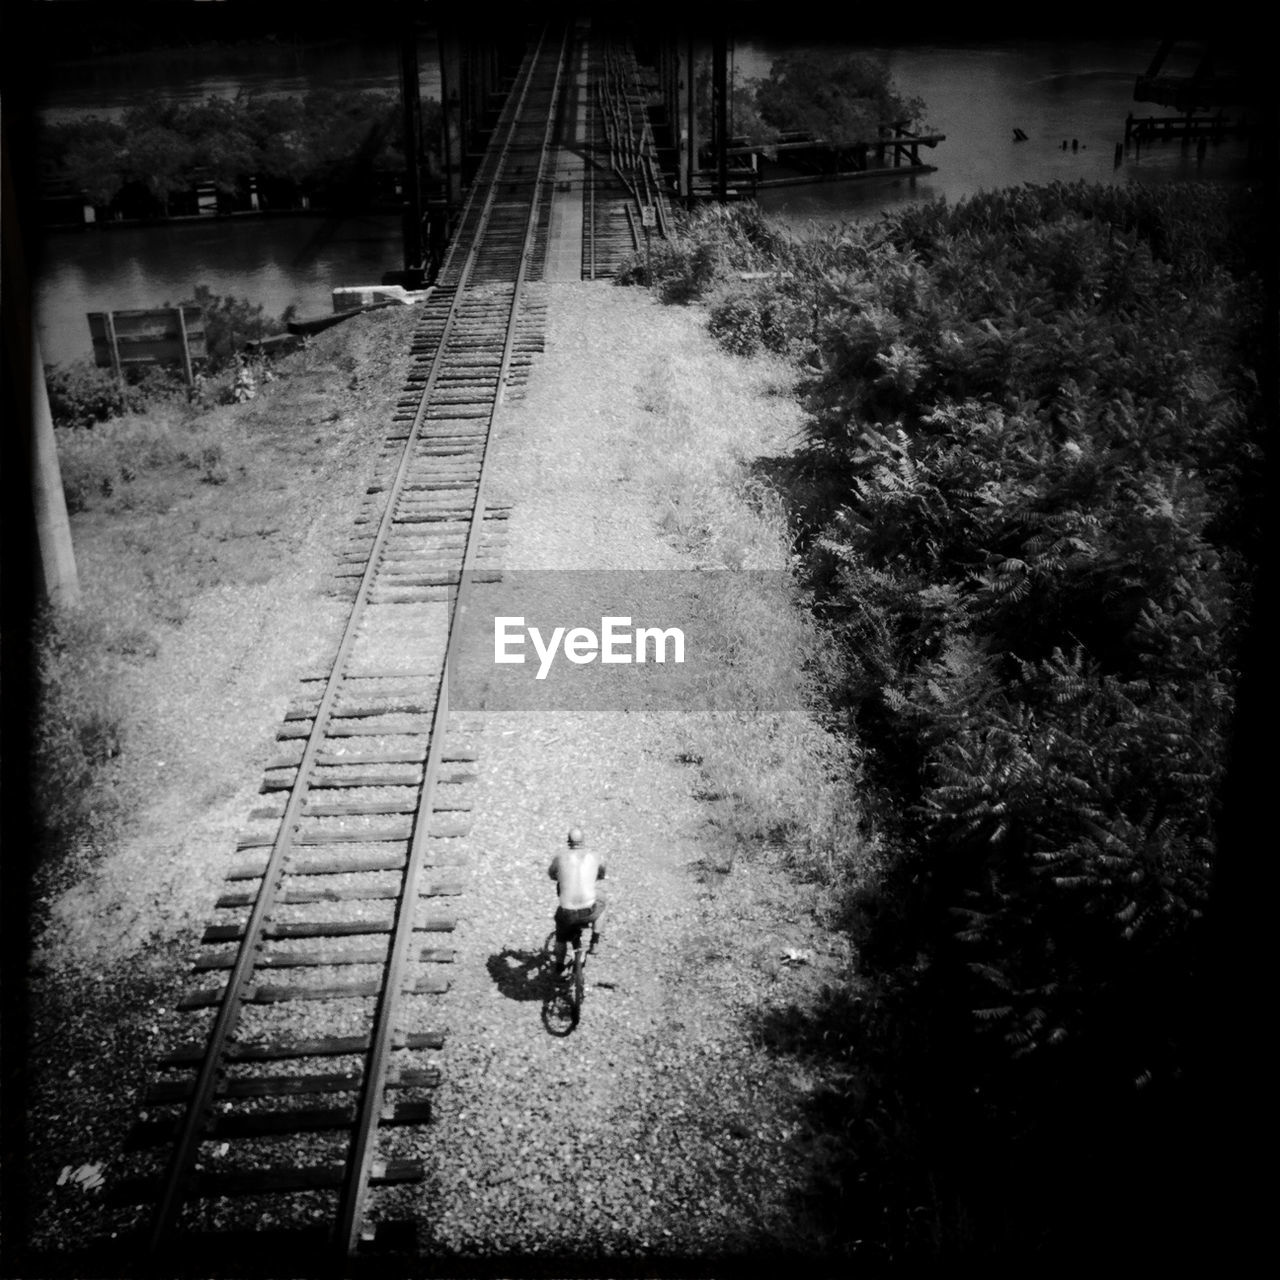 High angle view of shirtless man cycling by railroad tracks